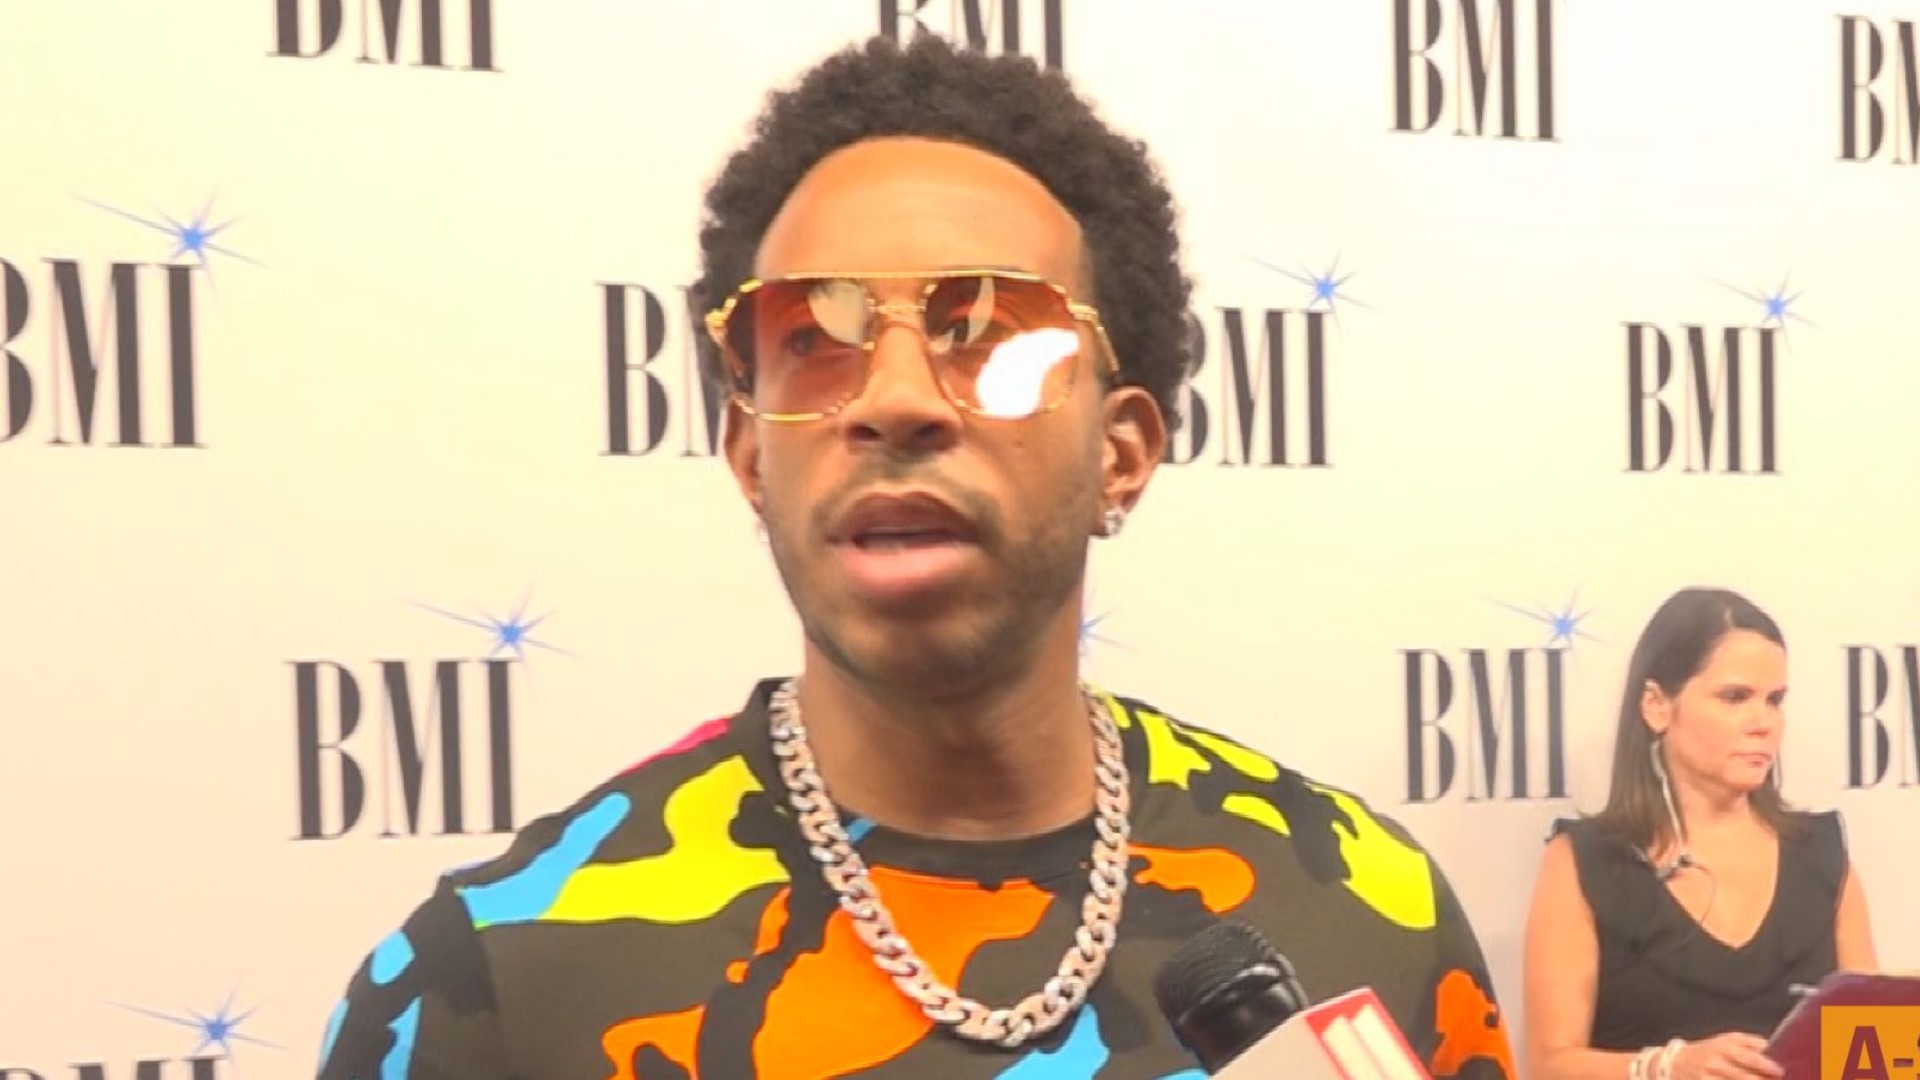 Ludacris kicked off Luda Day Weekend Thursday night during the 2019 BMI R&B/Hip-Hop Awards